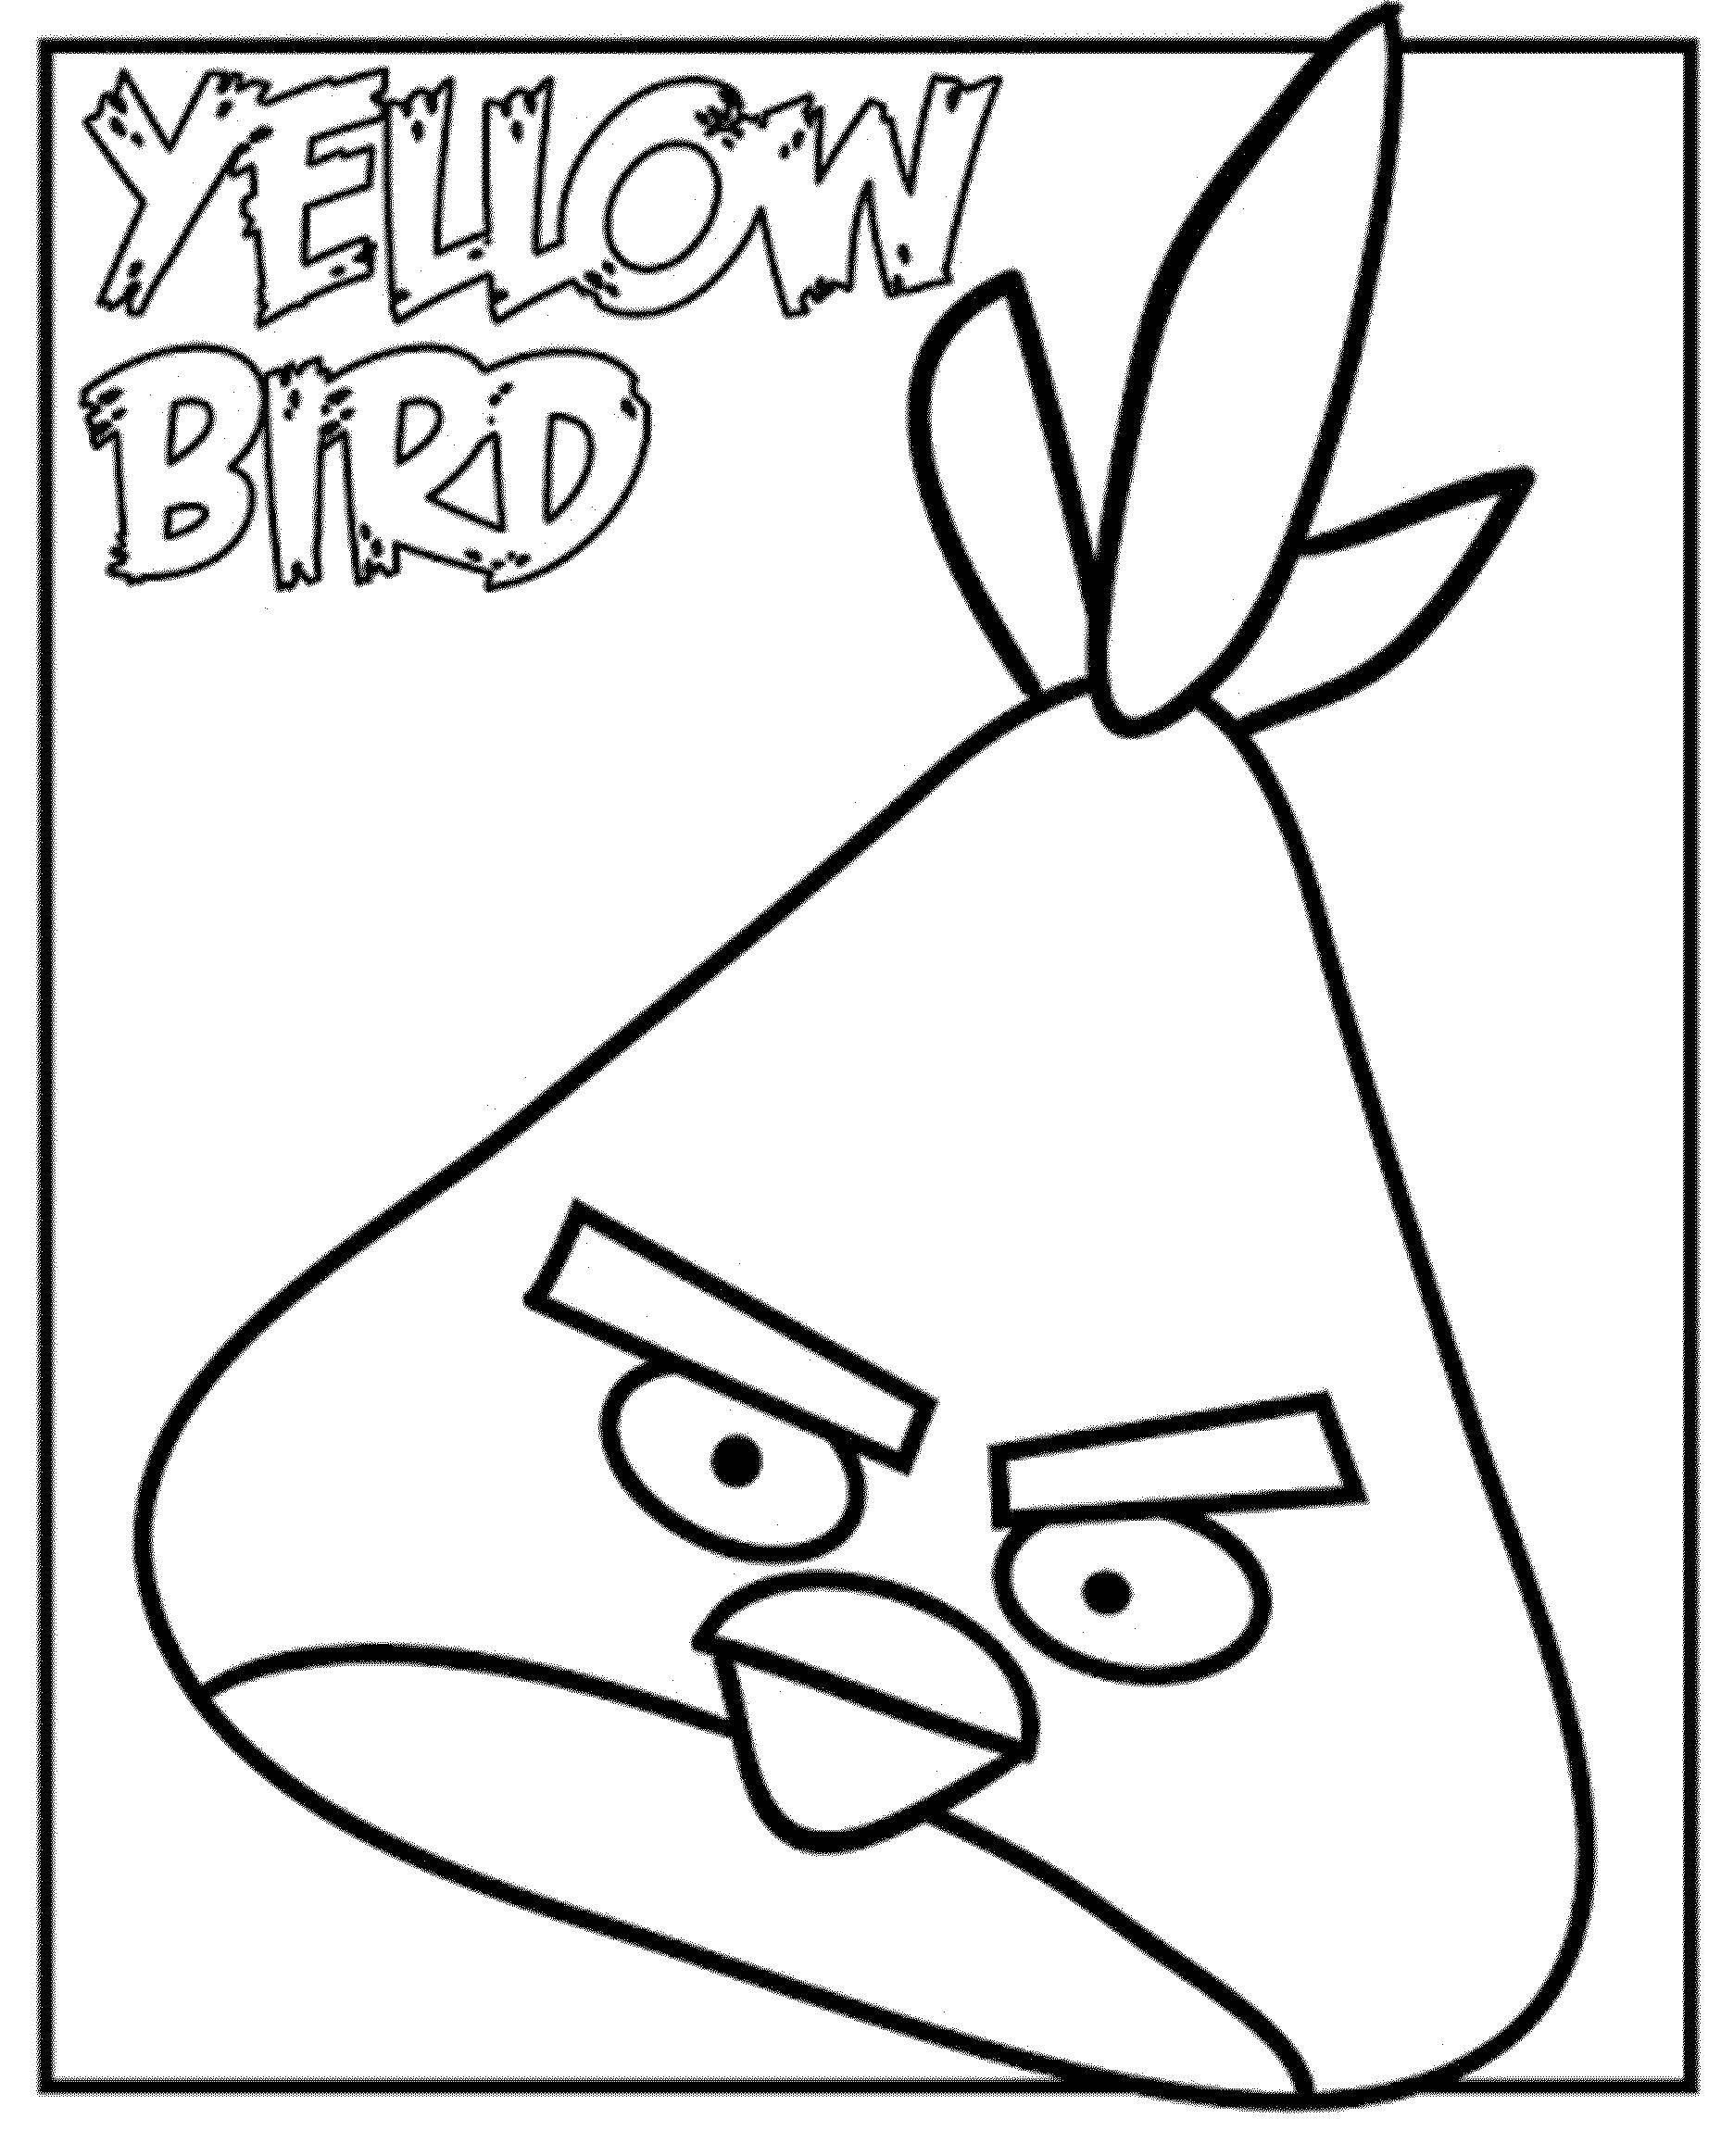 Coloring Bird from angry birds. Category angry birds. Tags:  angry birds, bird.